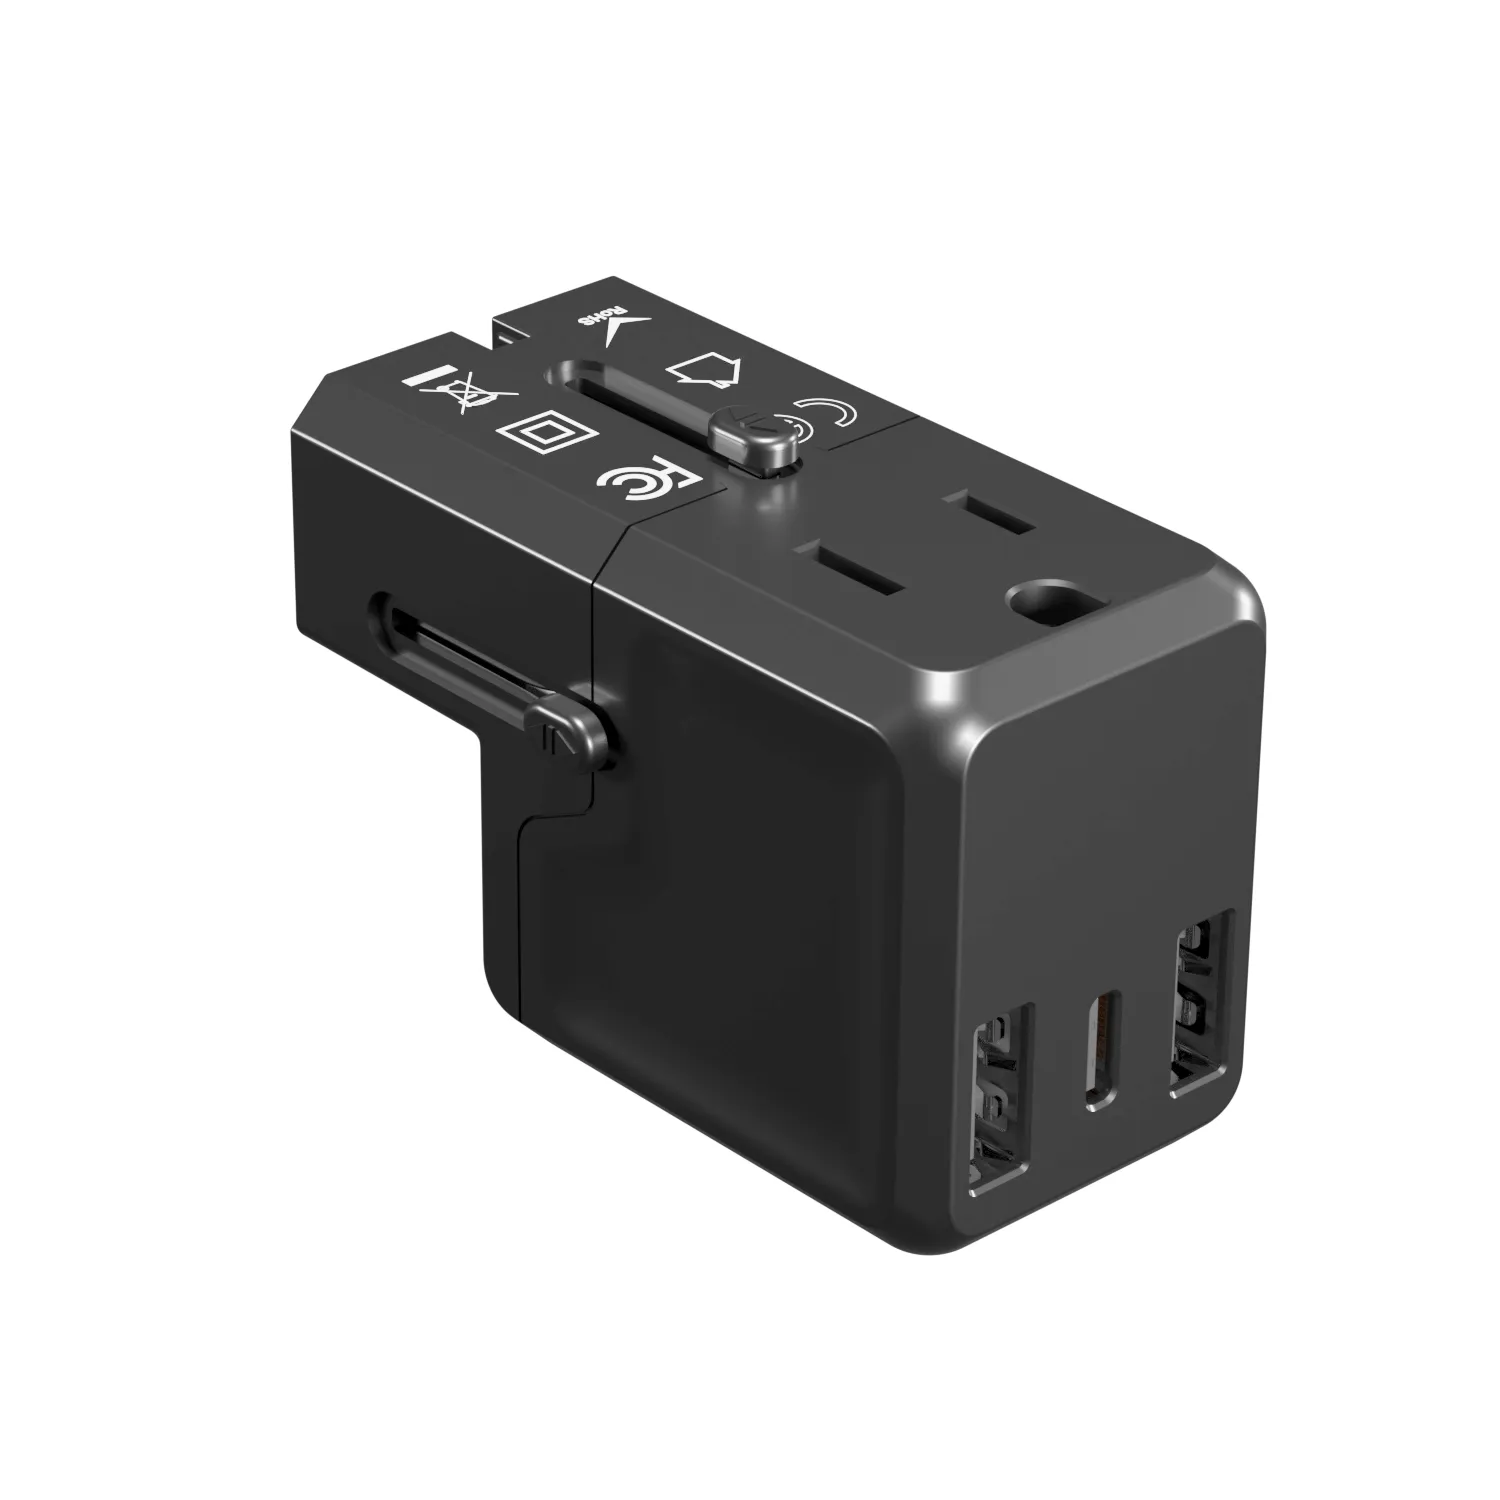 New Trend Mini Portable Global Travel Universal Adaptor USA Socket Mobile Phone Quick Charging Pocket Travel Charger